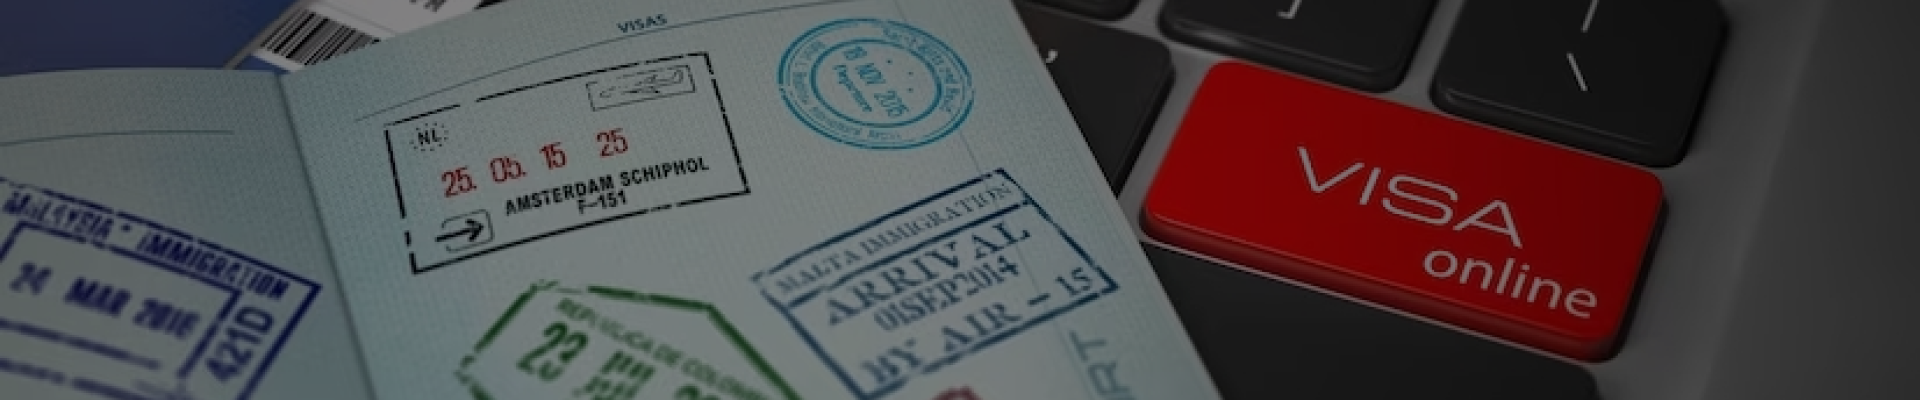 Single-entry and multi-entry visa